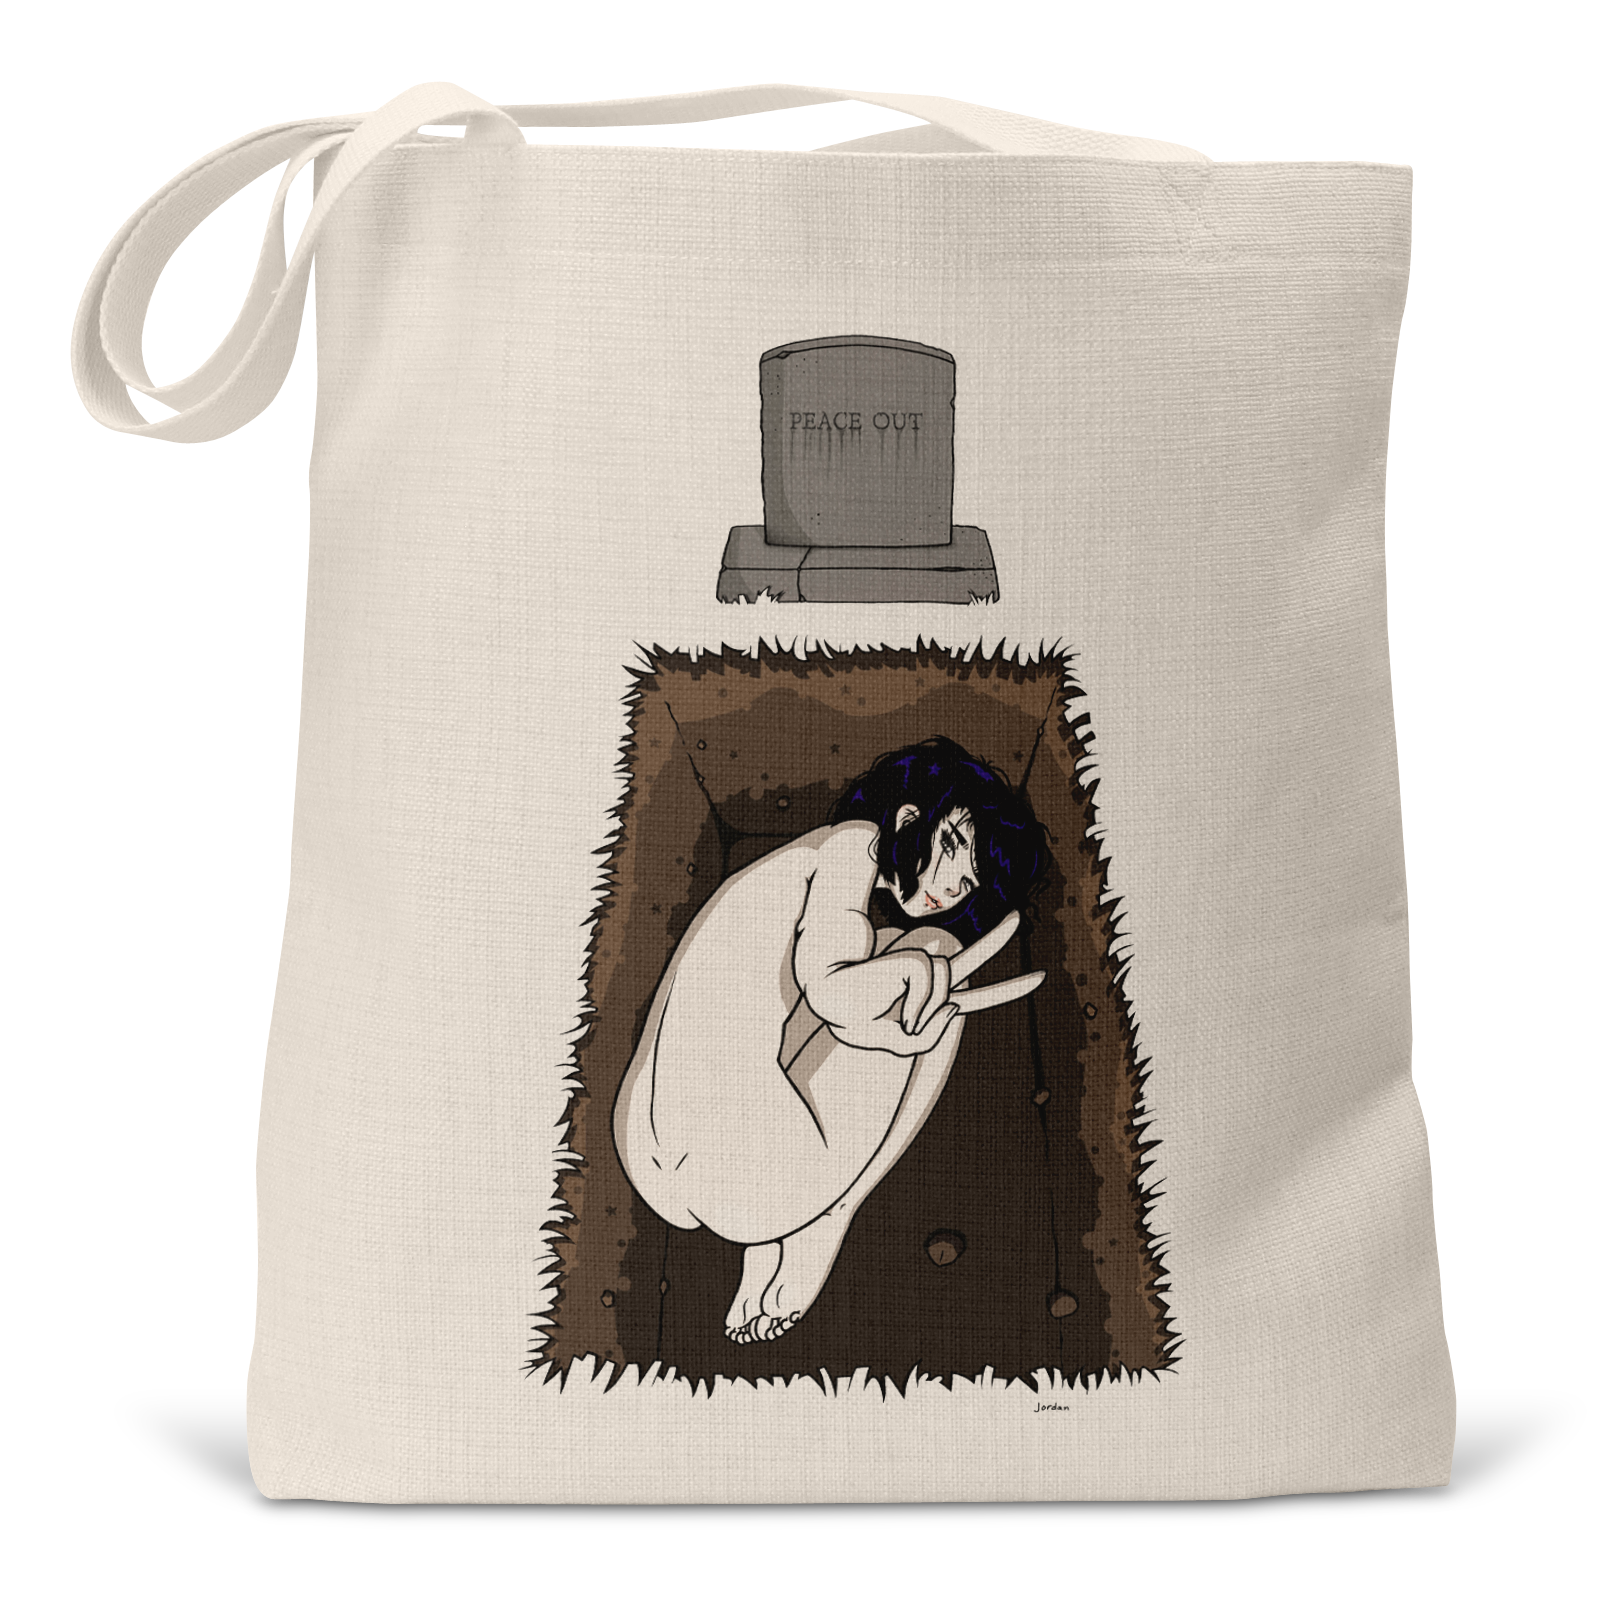 "Rest in Peace Out" - Small/Large Linen Tote